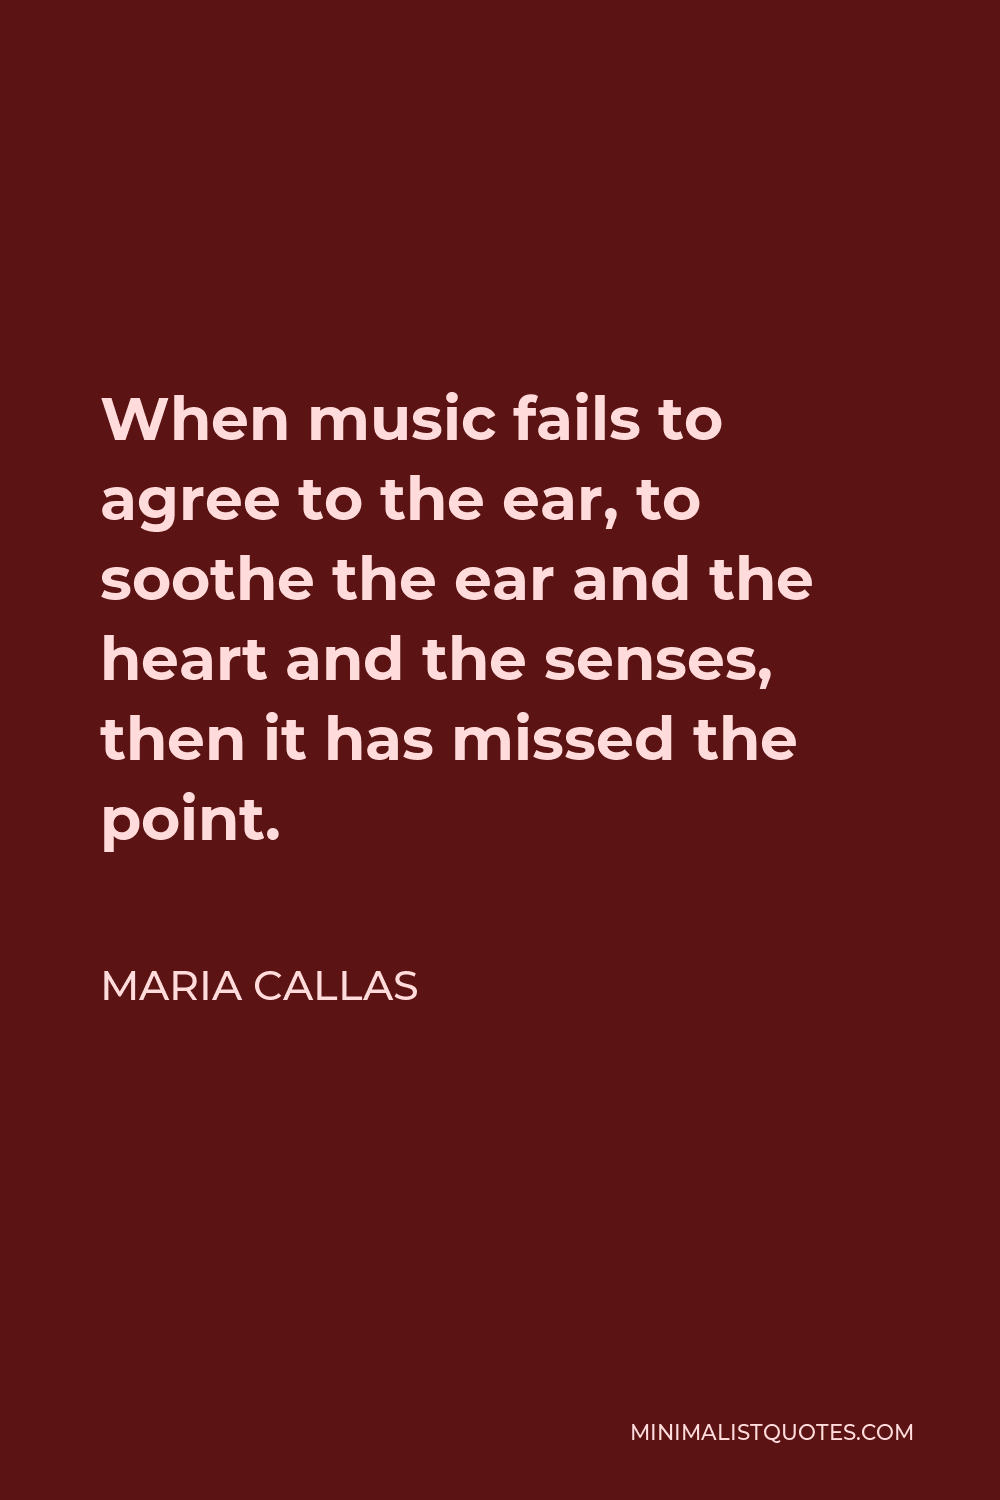 Maria Callas Quote - When music fails to agree to the ear, to soothe the ear and the heart and the senses, then it has missed the point.